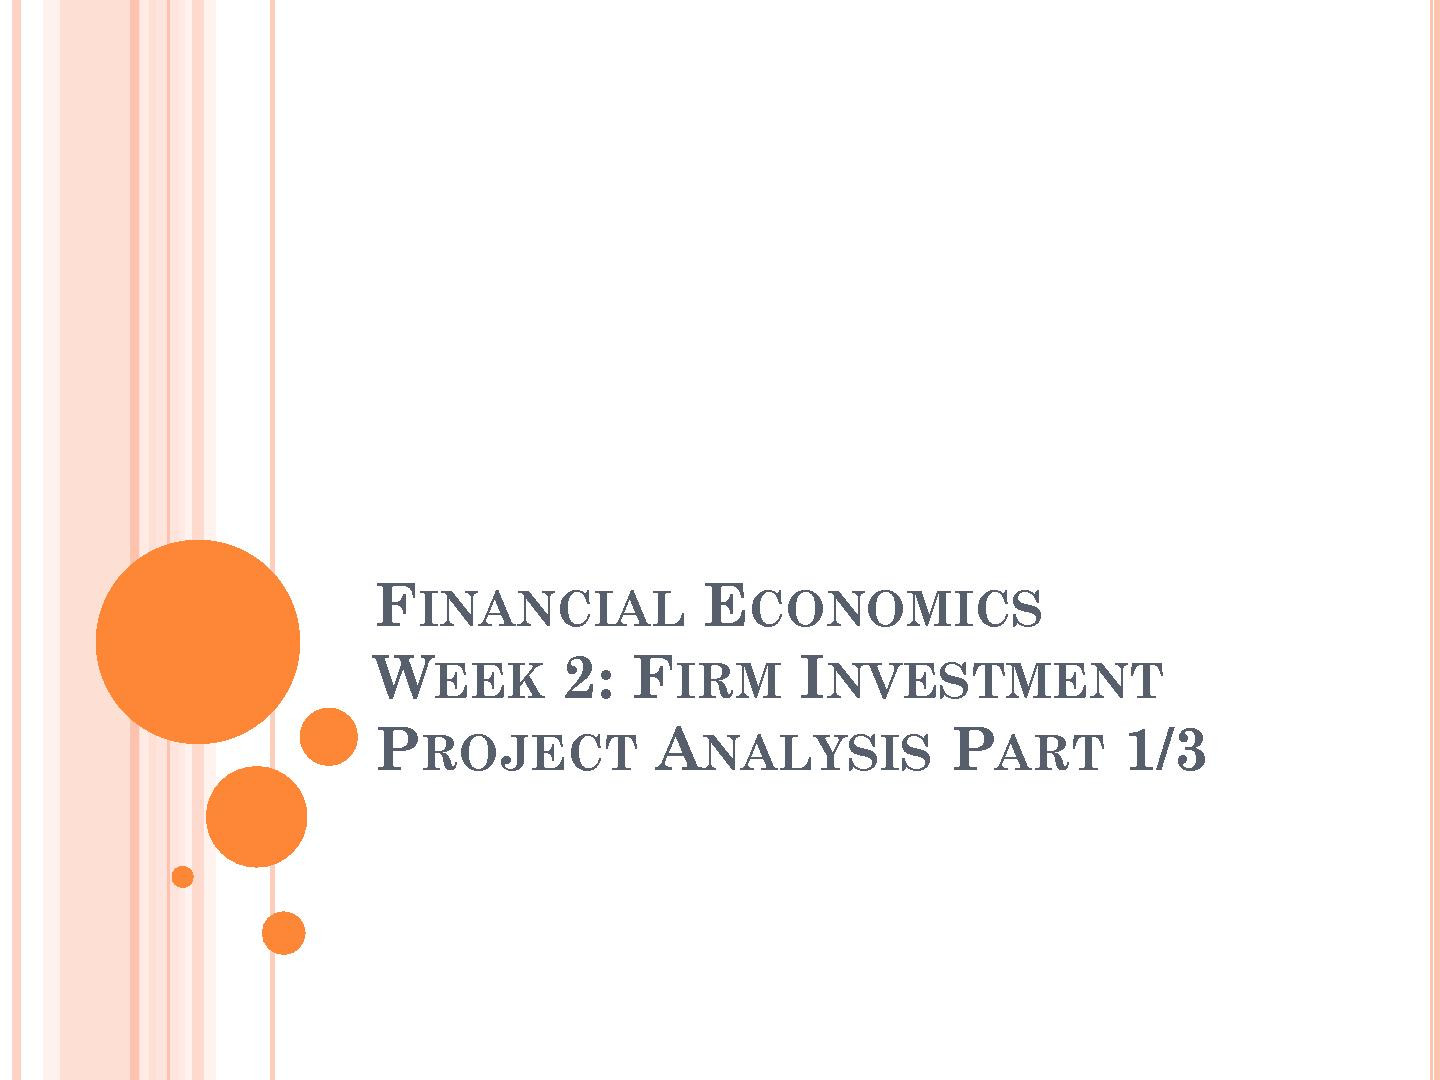 FINANCIAL ECONOMICS WEEK 2: FIRM INVESTMENT PROJECT ANALYSIS PART 1/3